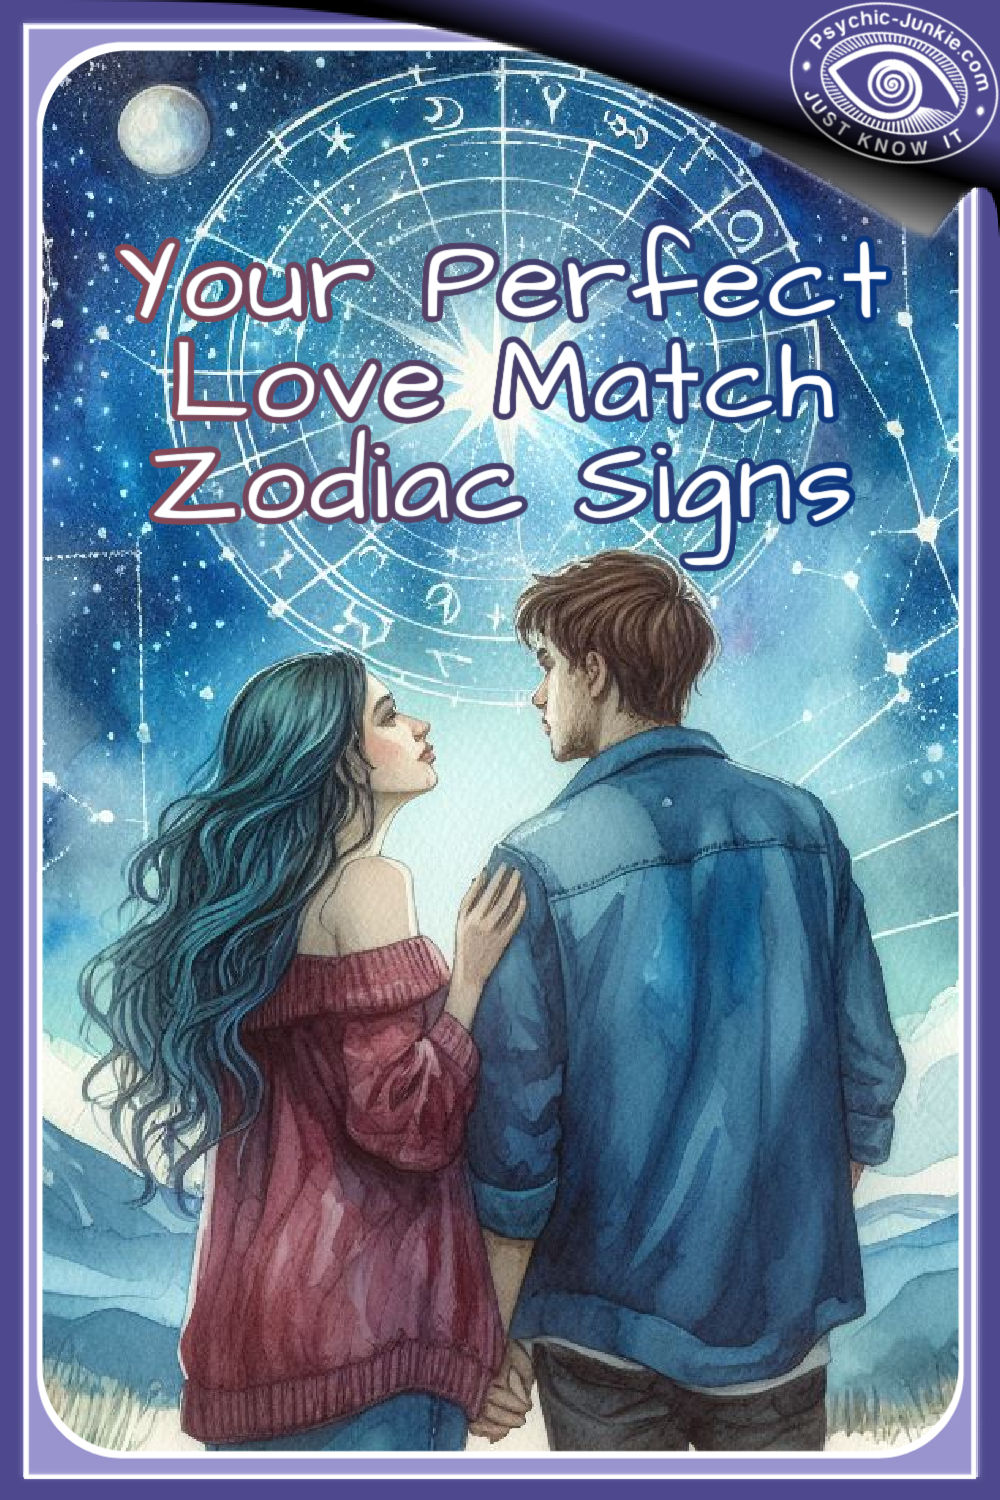 Your Perfect Love Match Zodiac Signs